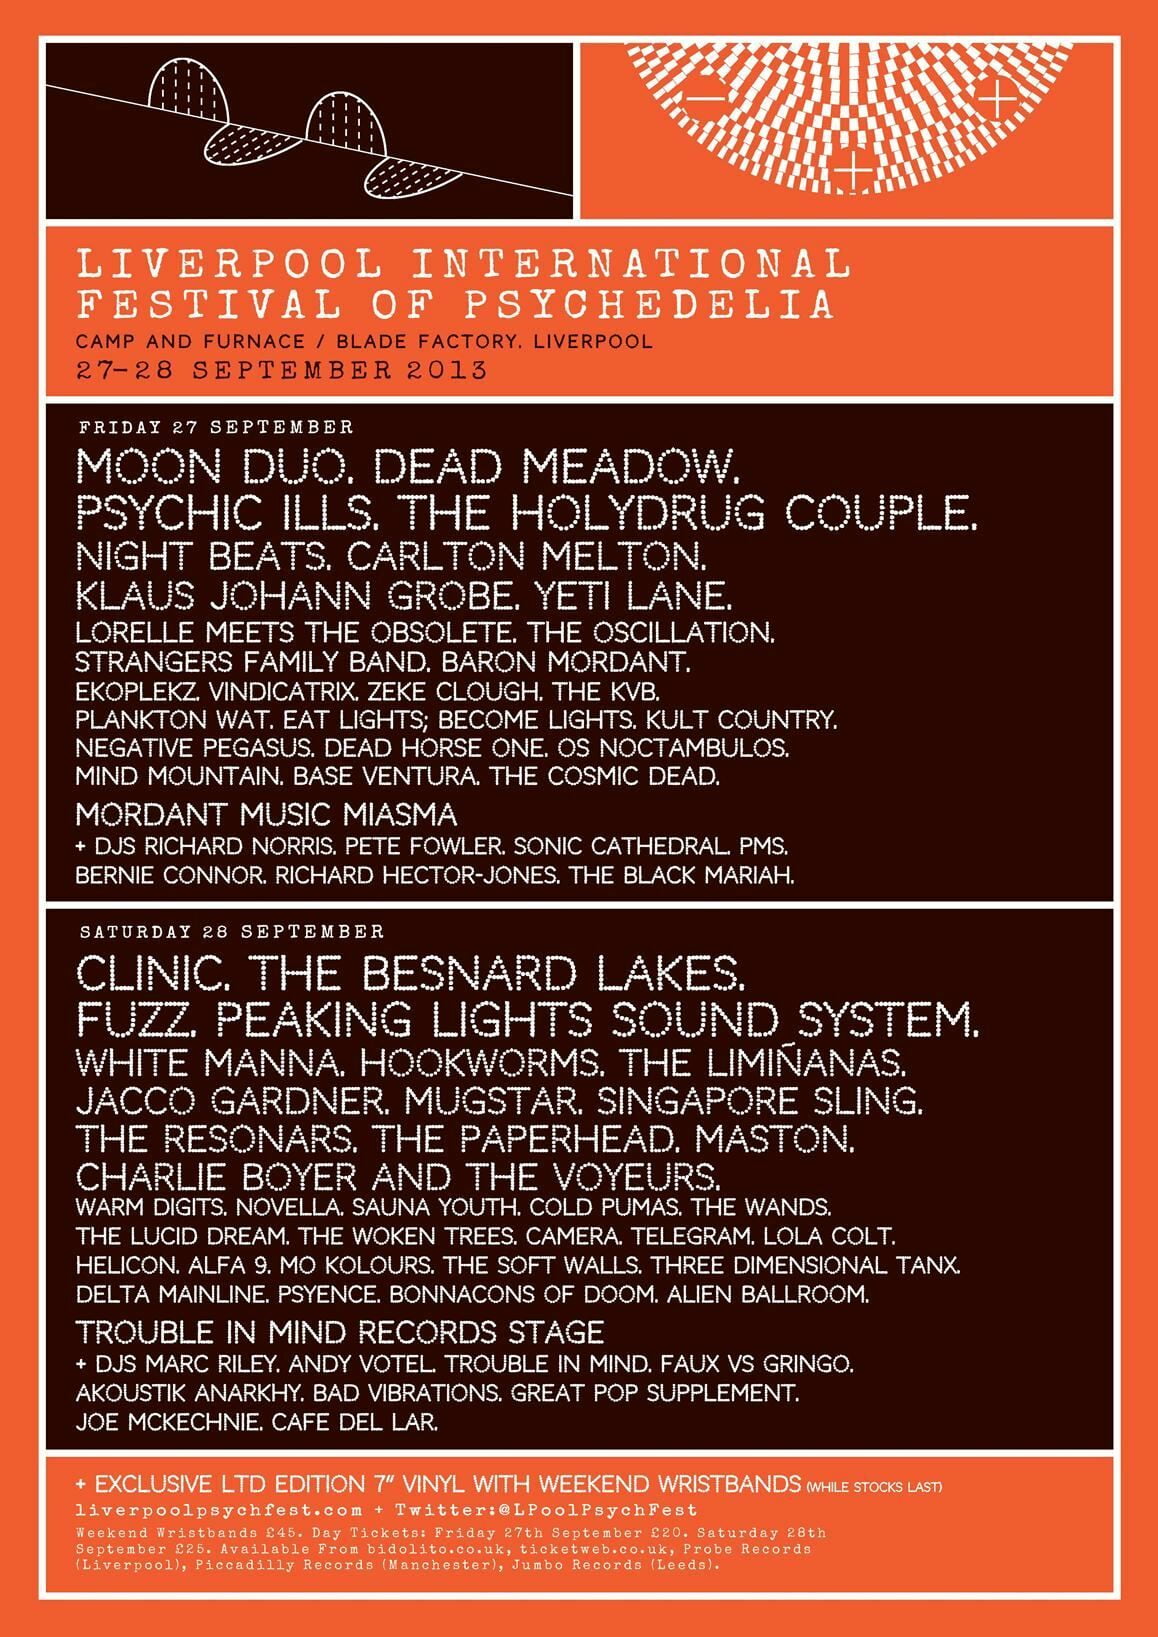 The VPME | LIVERPOOL 'PSYCH FEST' - LINE-UP ADDITIONs / 7" VINYL / CHARLIE BOYER /LOLA COLT/ MARC RILEY